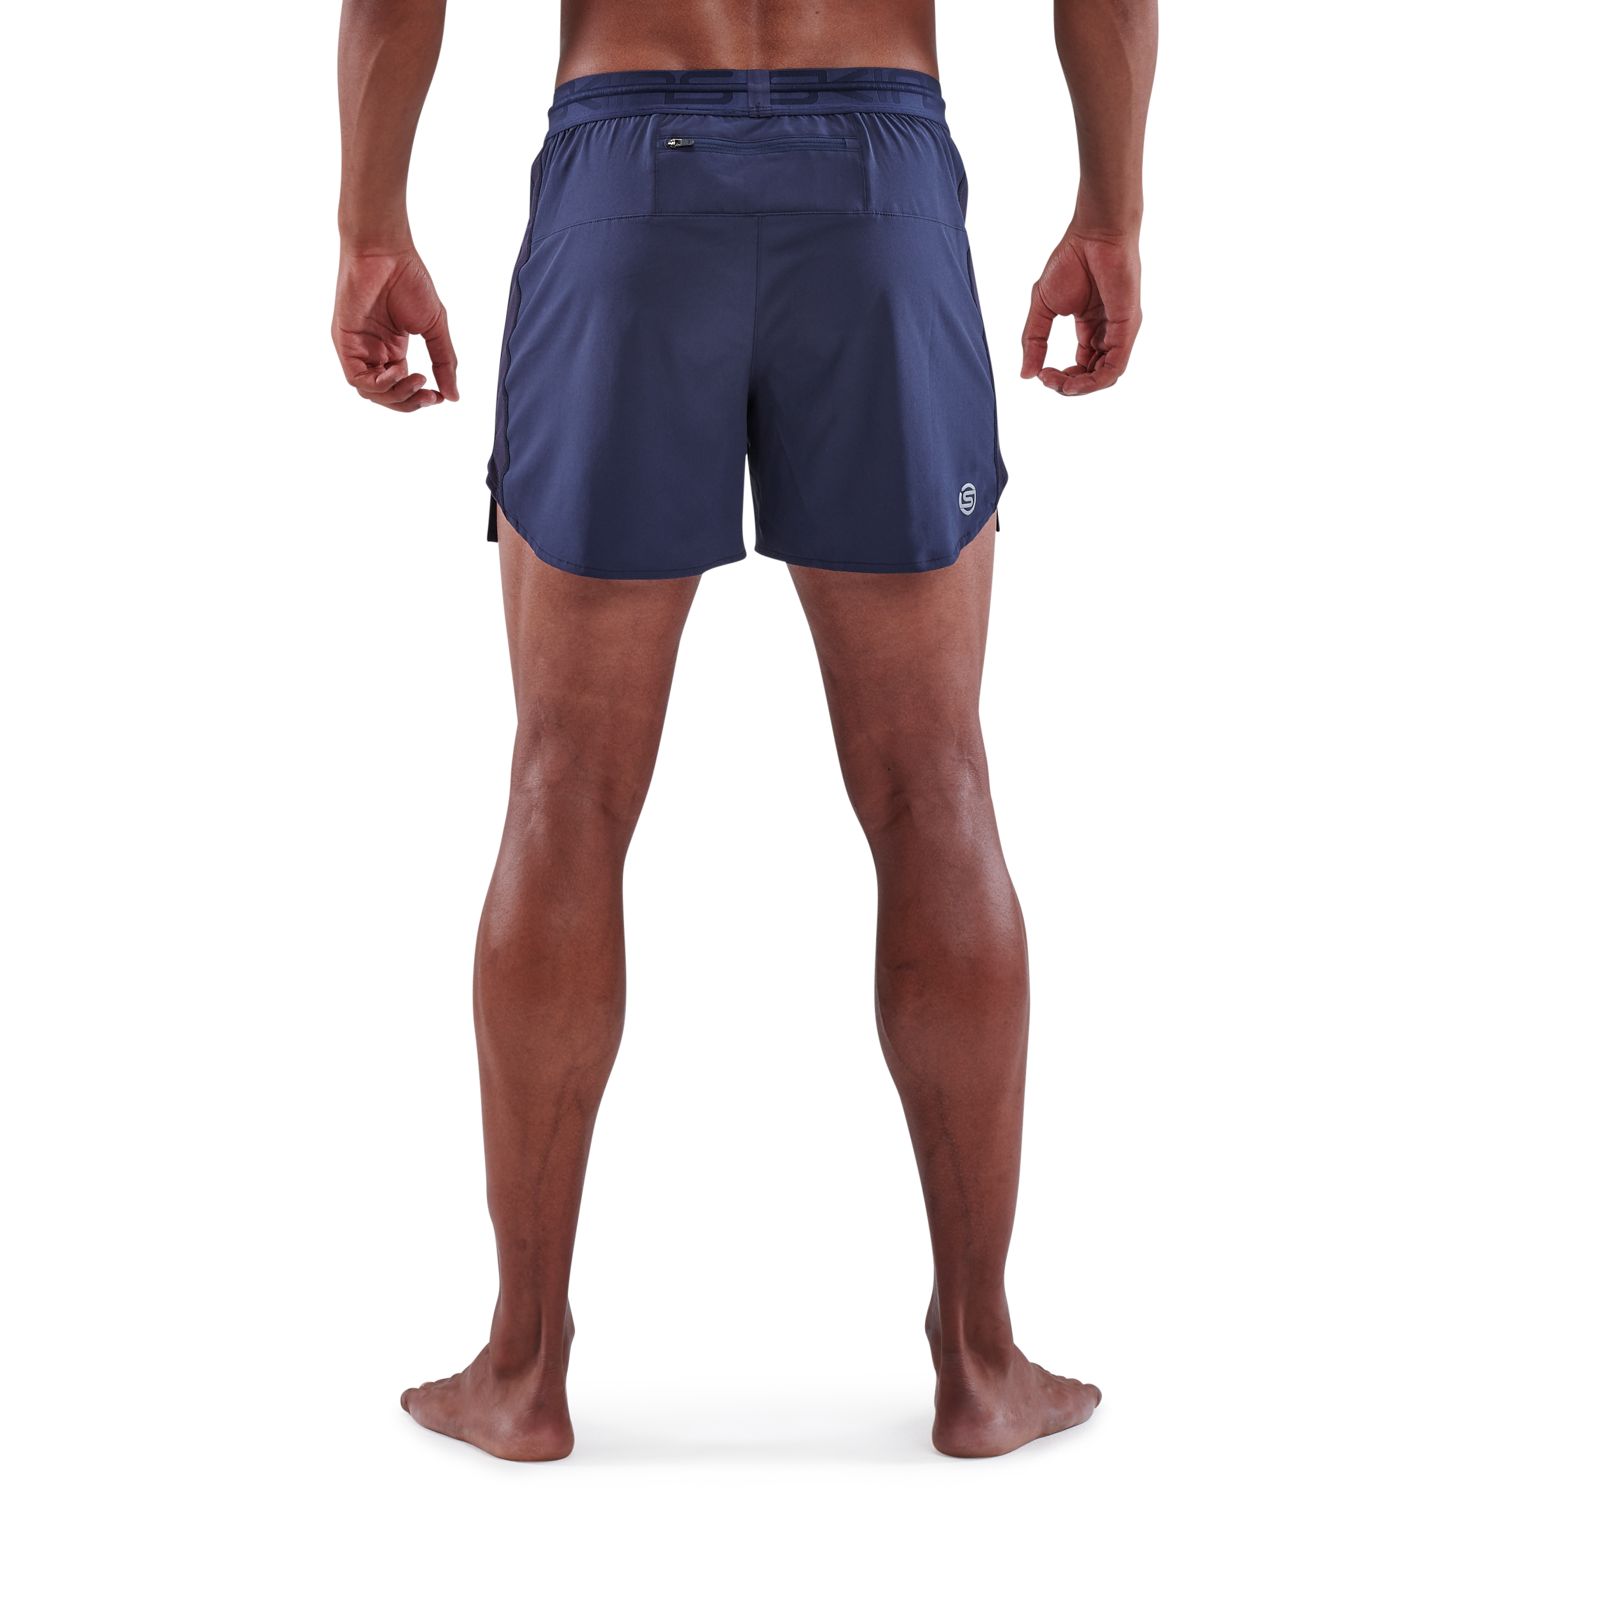 Navy Blue Workout Shorts with Compression Pants - Men's Sportswear /   – Along Wear